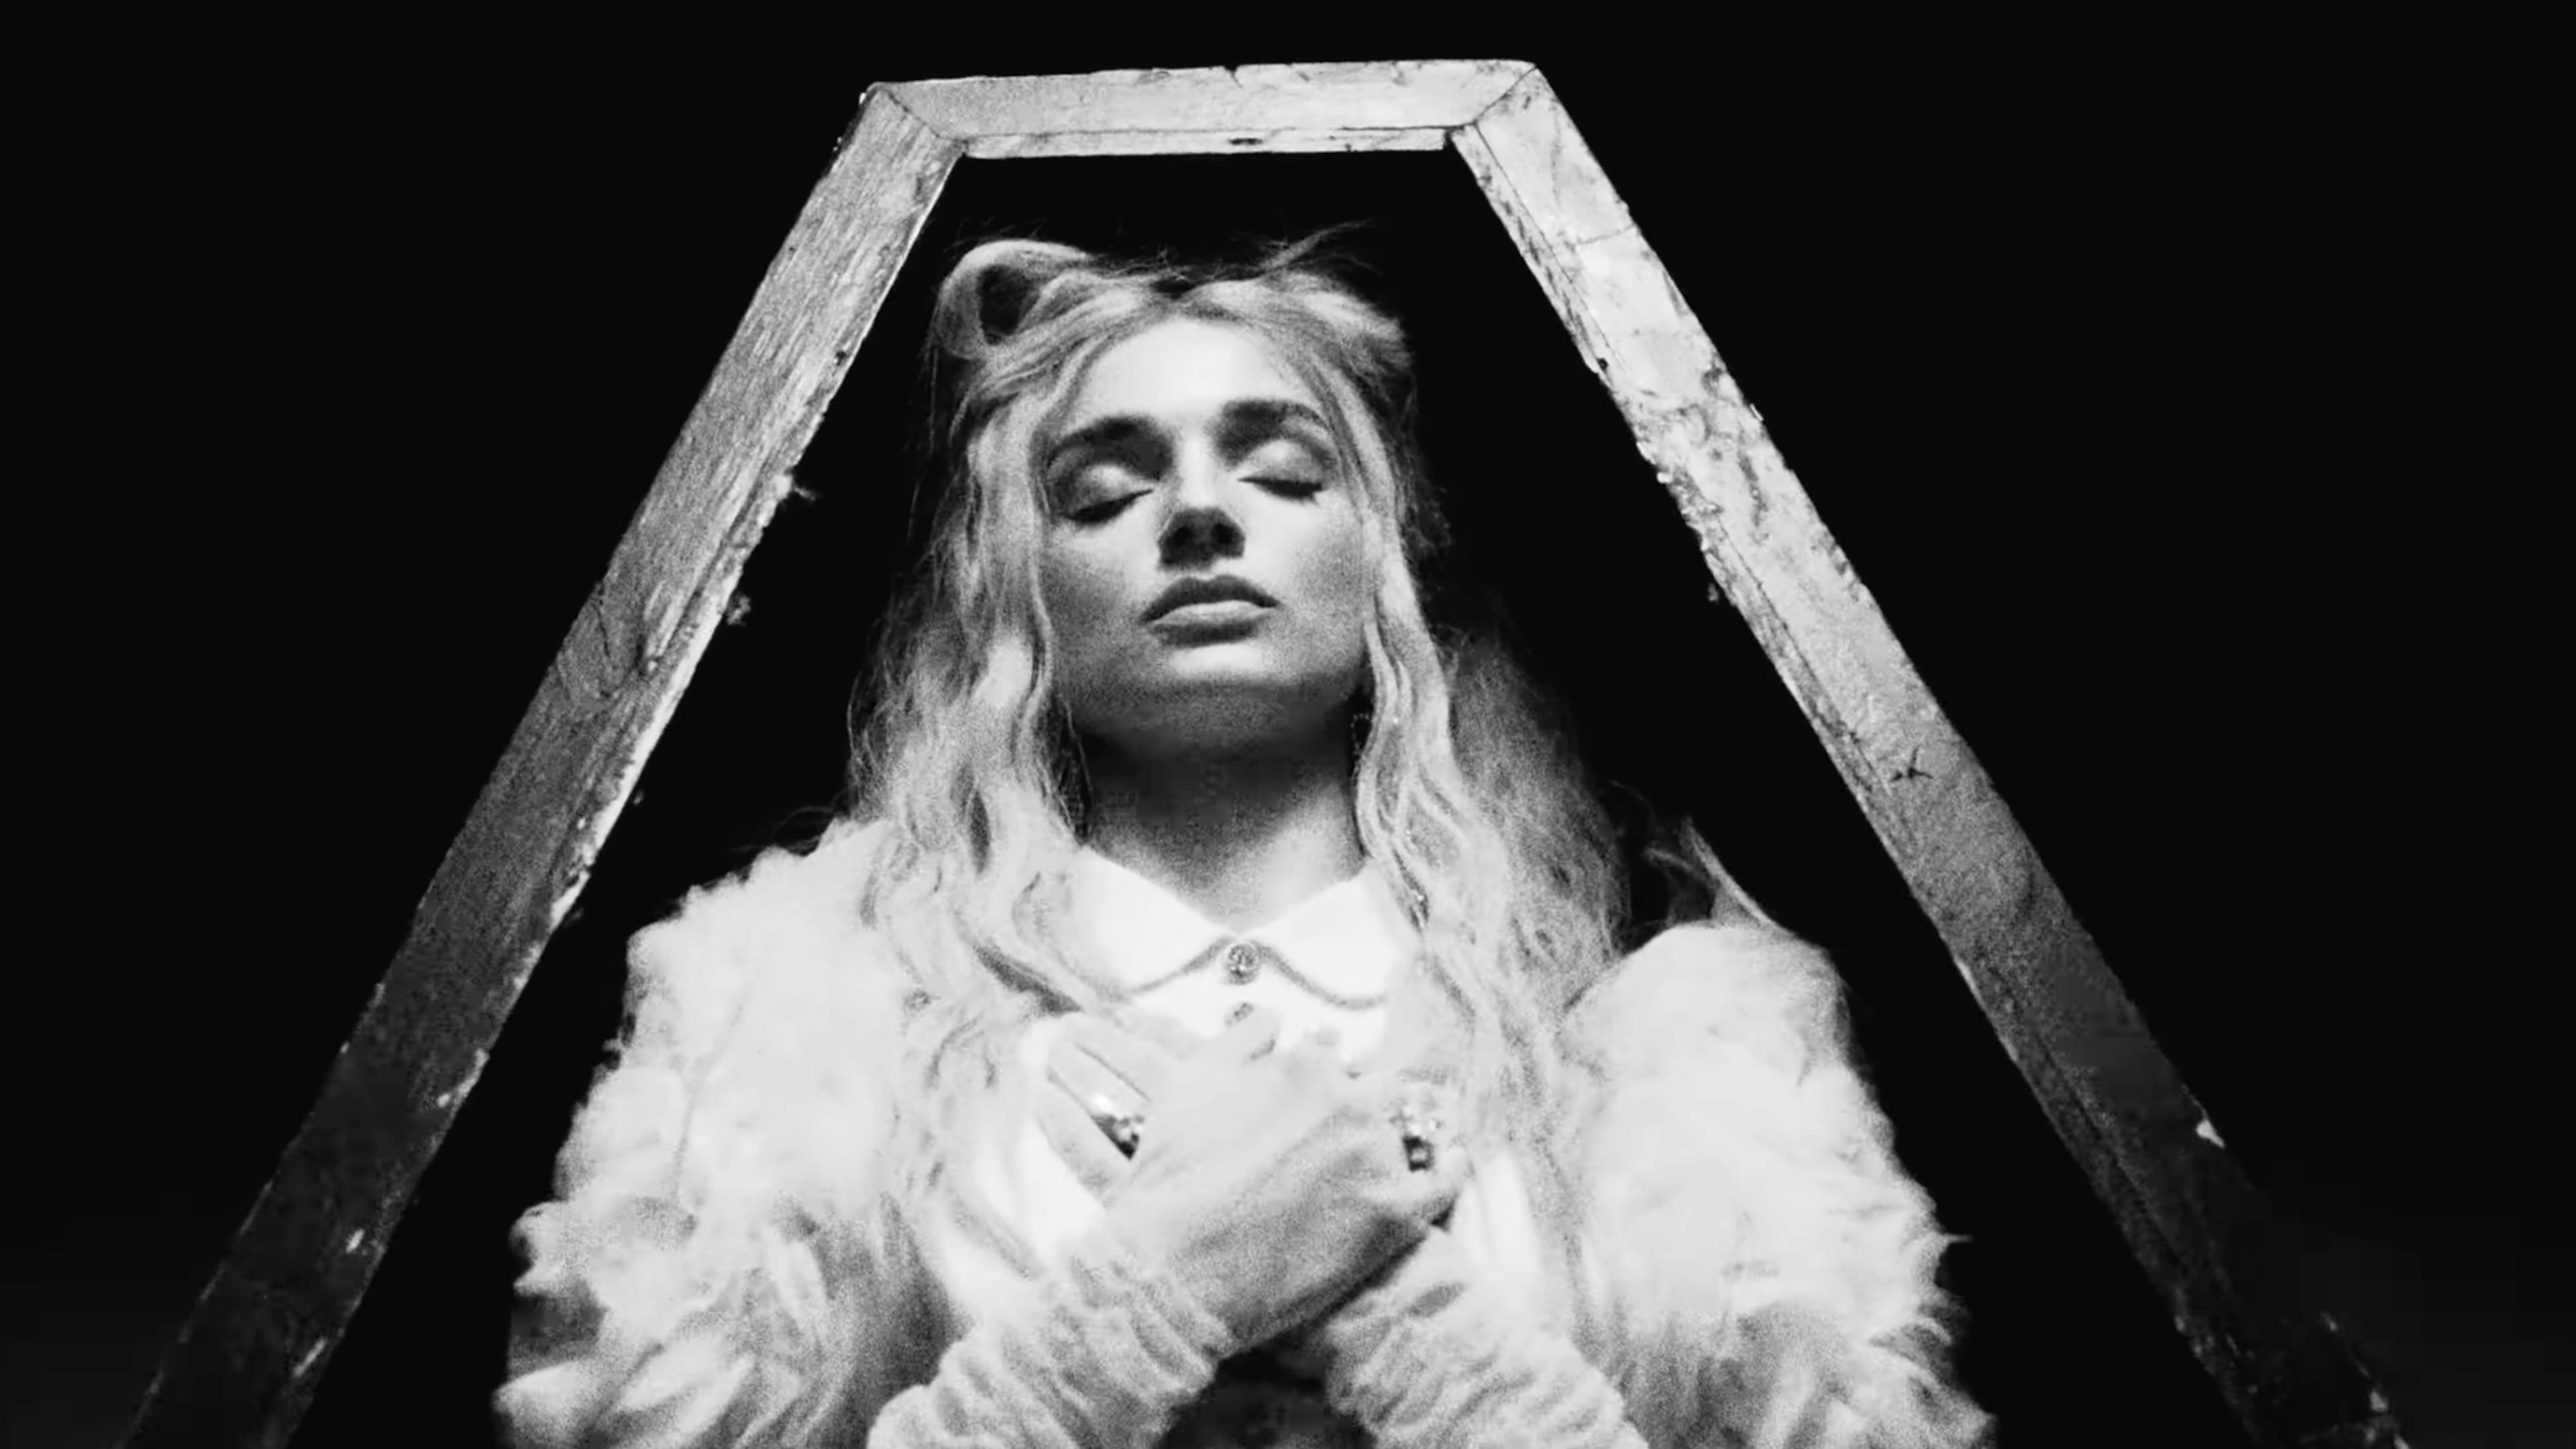 Watch the video for Poppy’s killer new single, Church Outfit